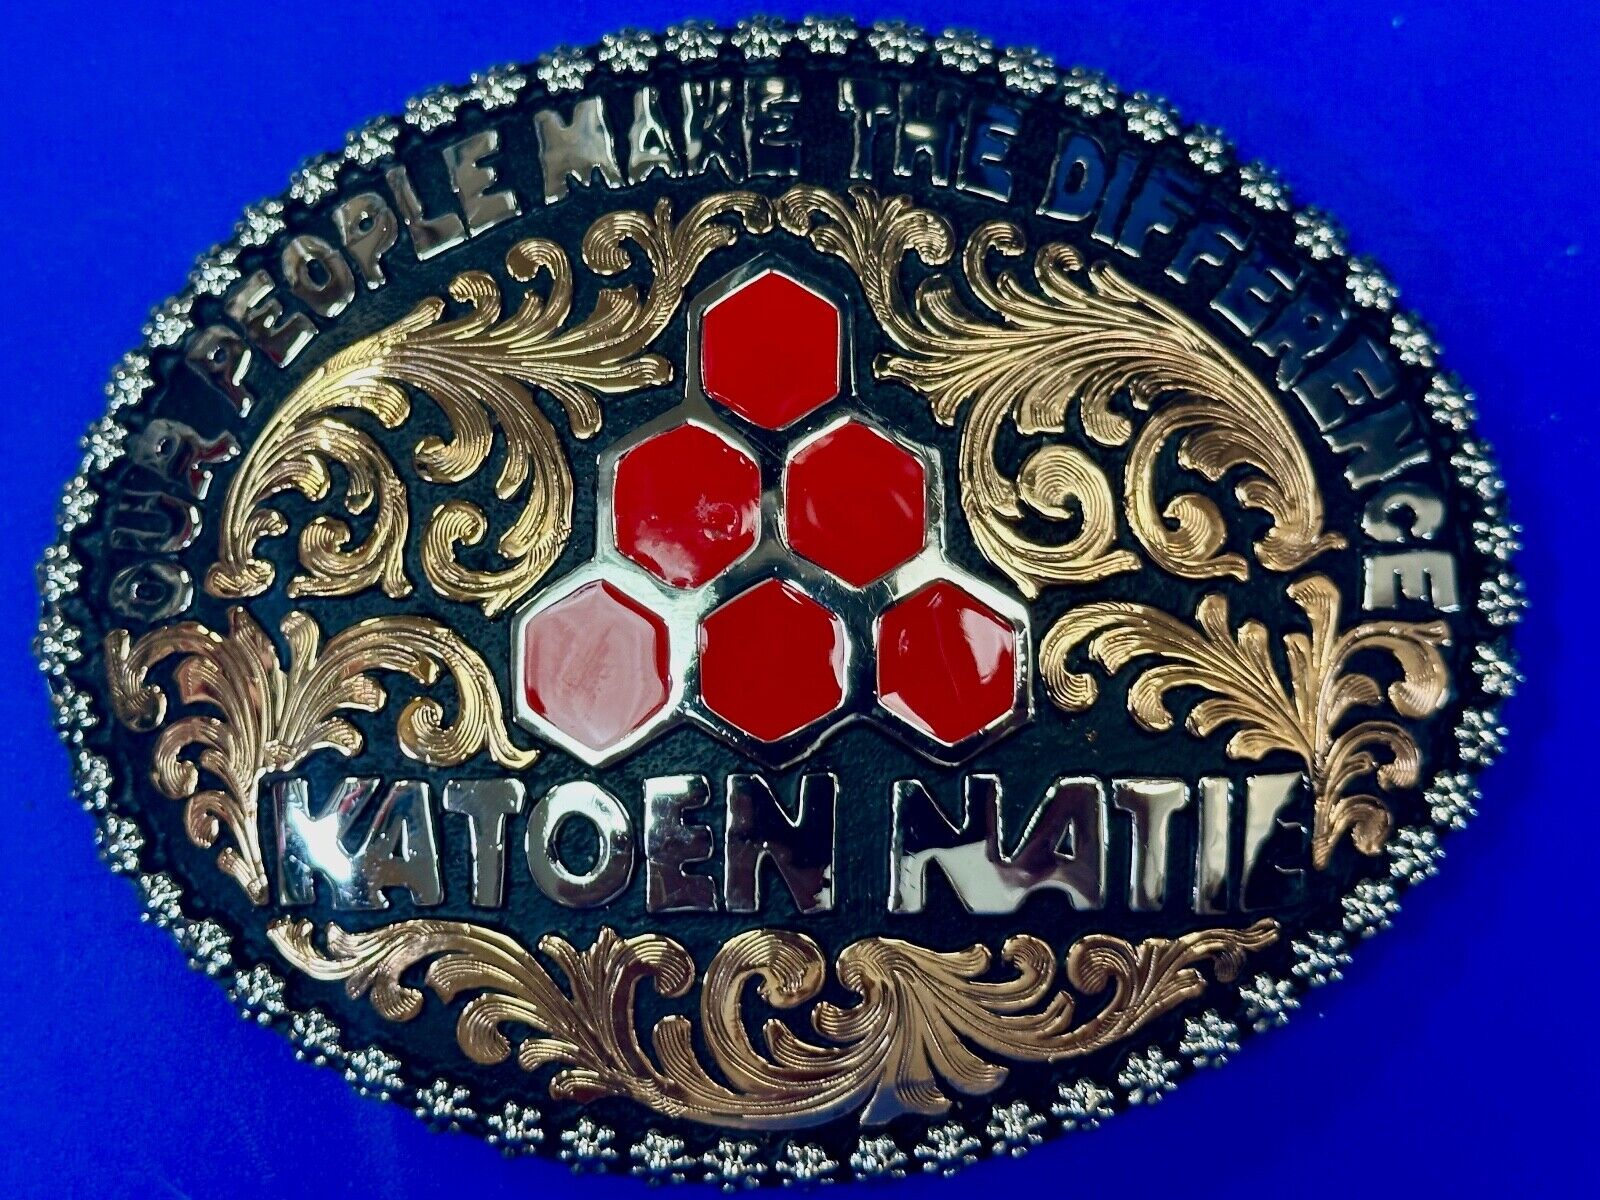 Katoen Natie Company our people make the difference Trophy style belt buckle DB